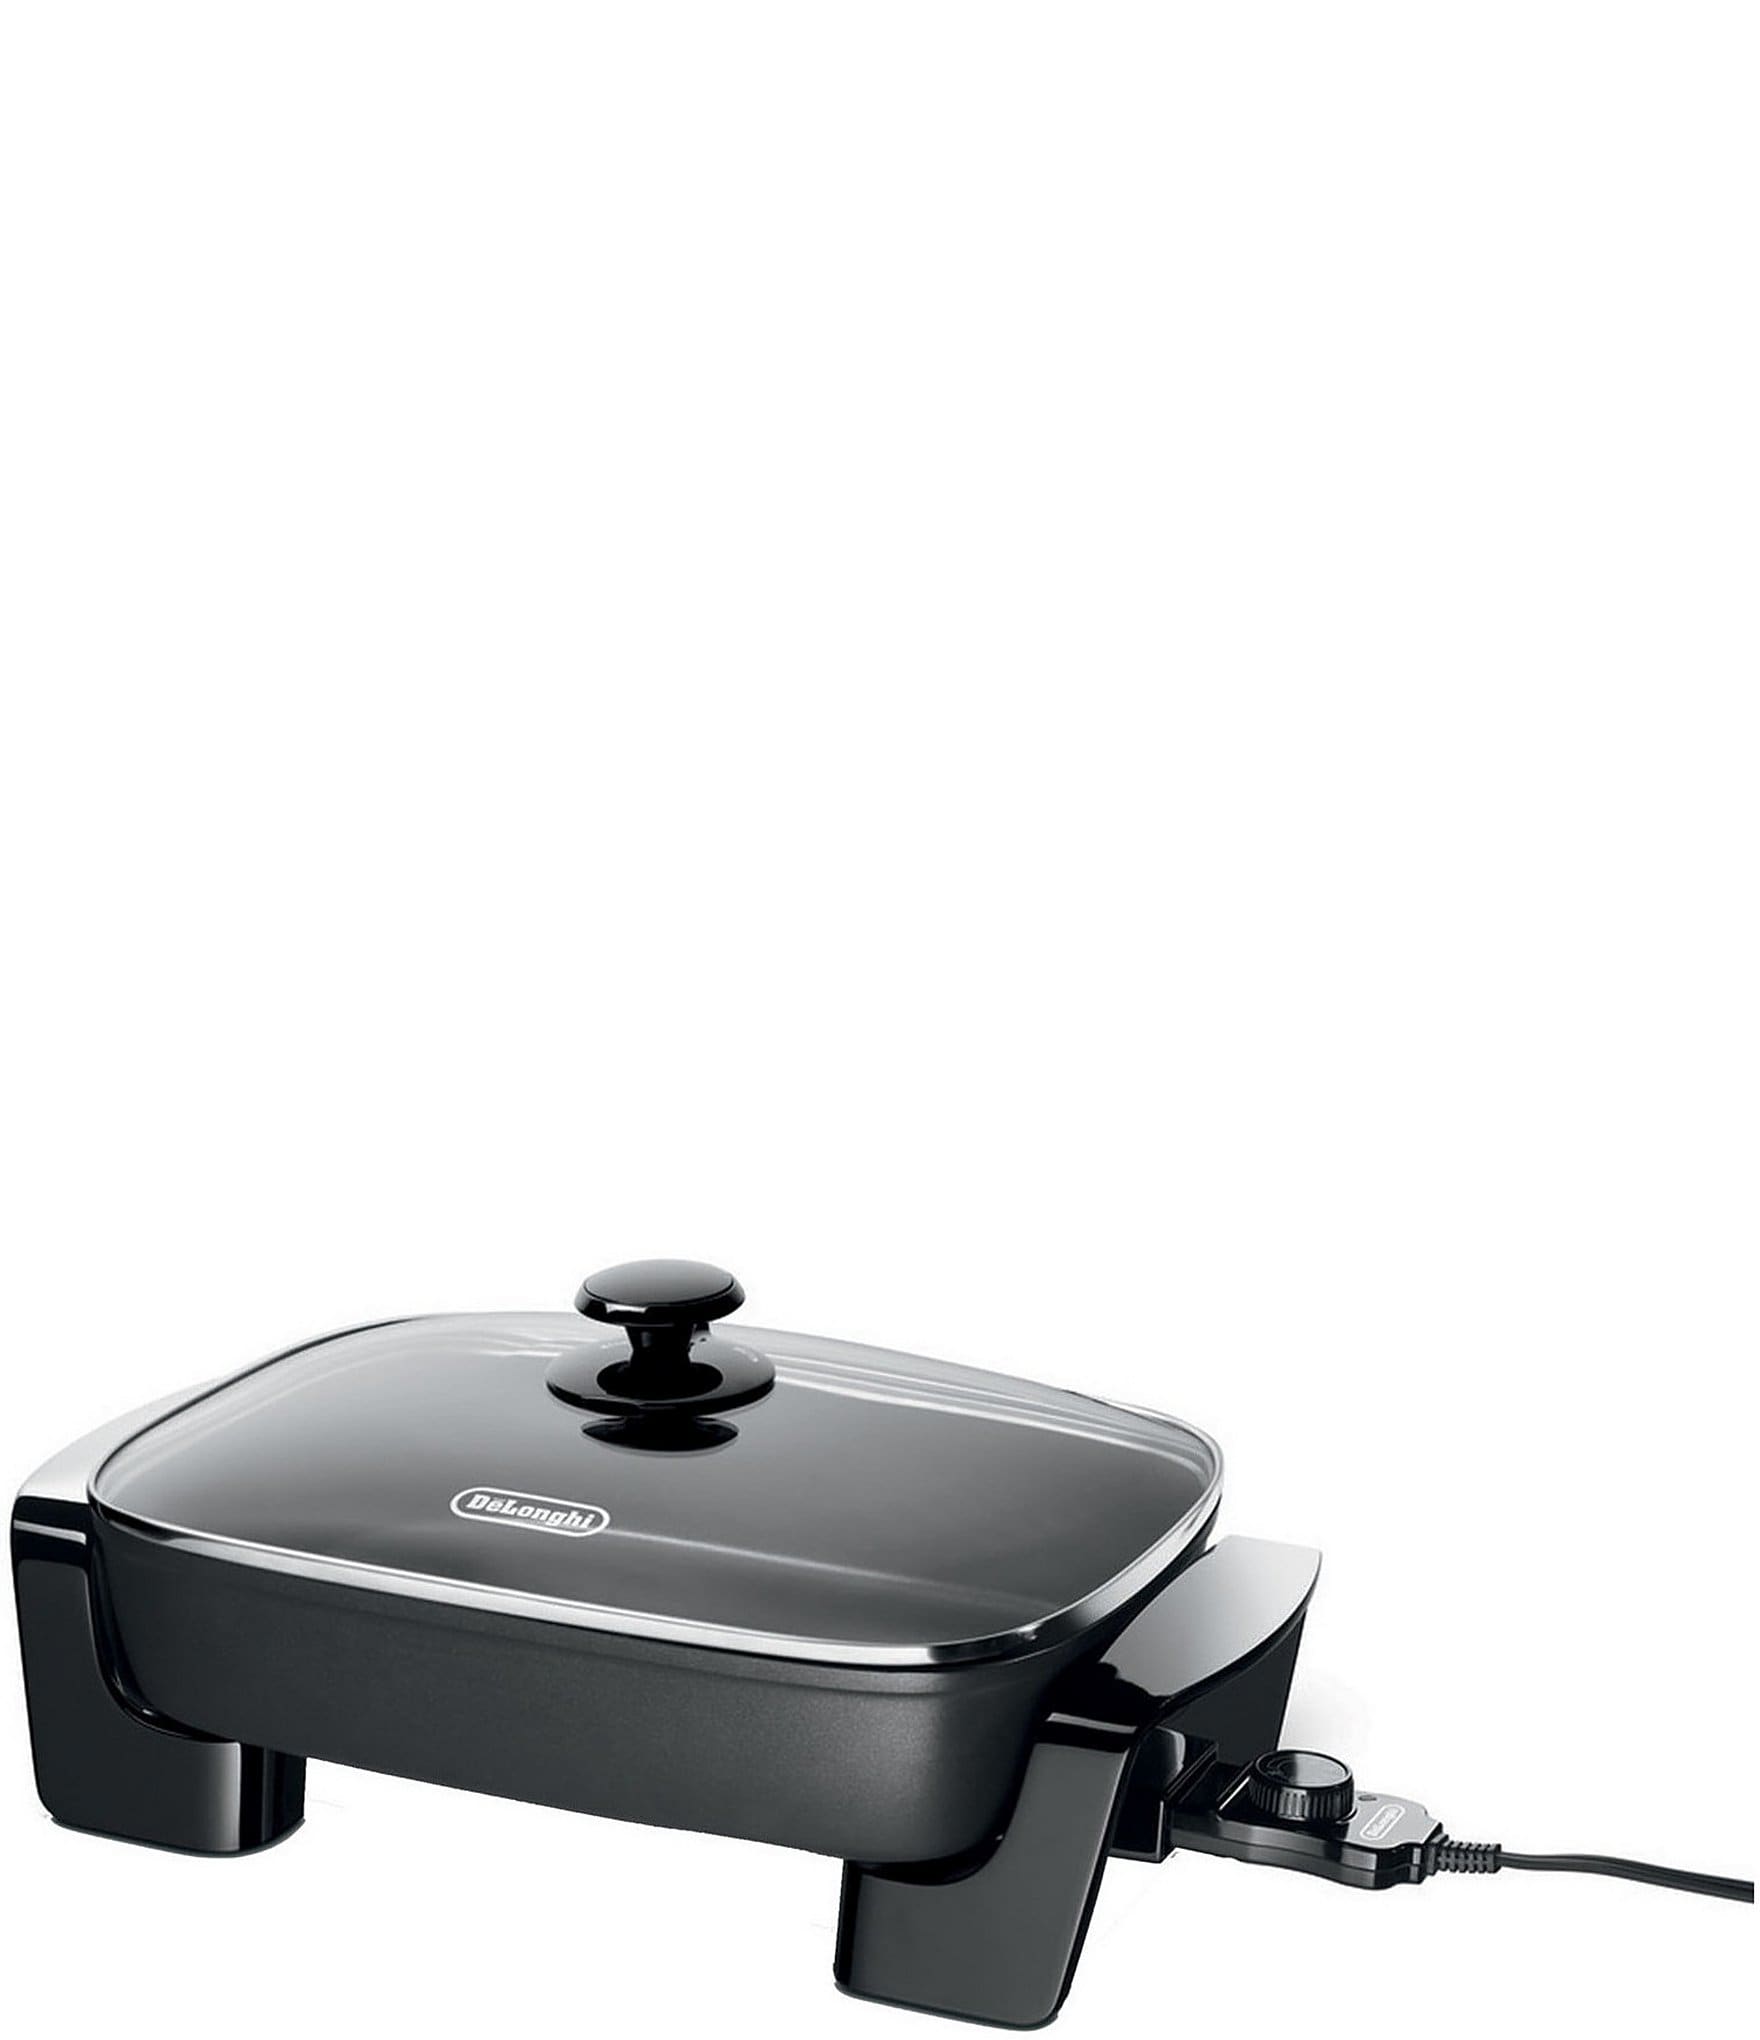 https://dimg.dillards.com/is/image/DillardsZoom/zoom/delonghi-electric-skillet-with-tempered-glass-lid/05916827_zi.jpg